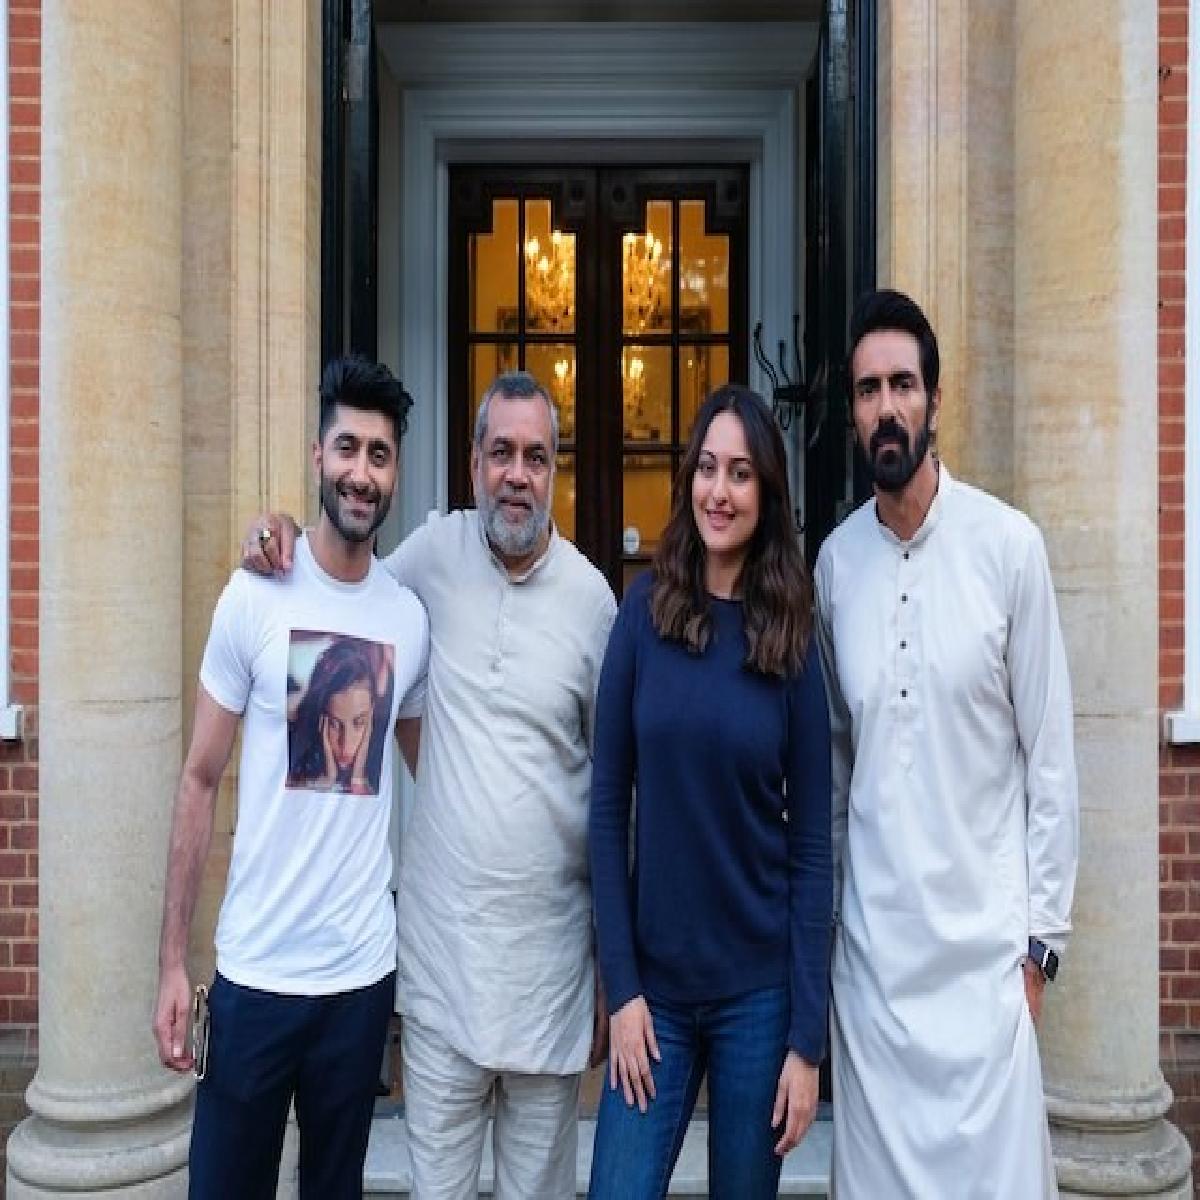 Nicky Vicky Bhagnani Films Welcomes Arjun Rampal On-Board Nikit Roy And The Book Of Darkness